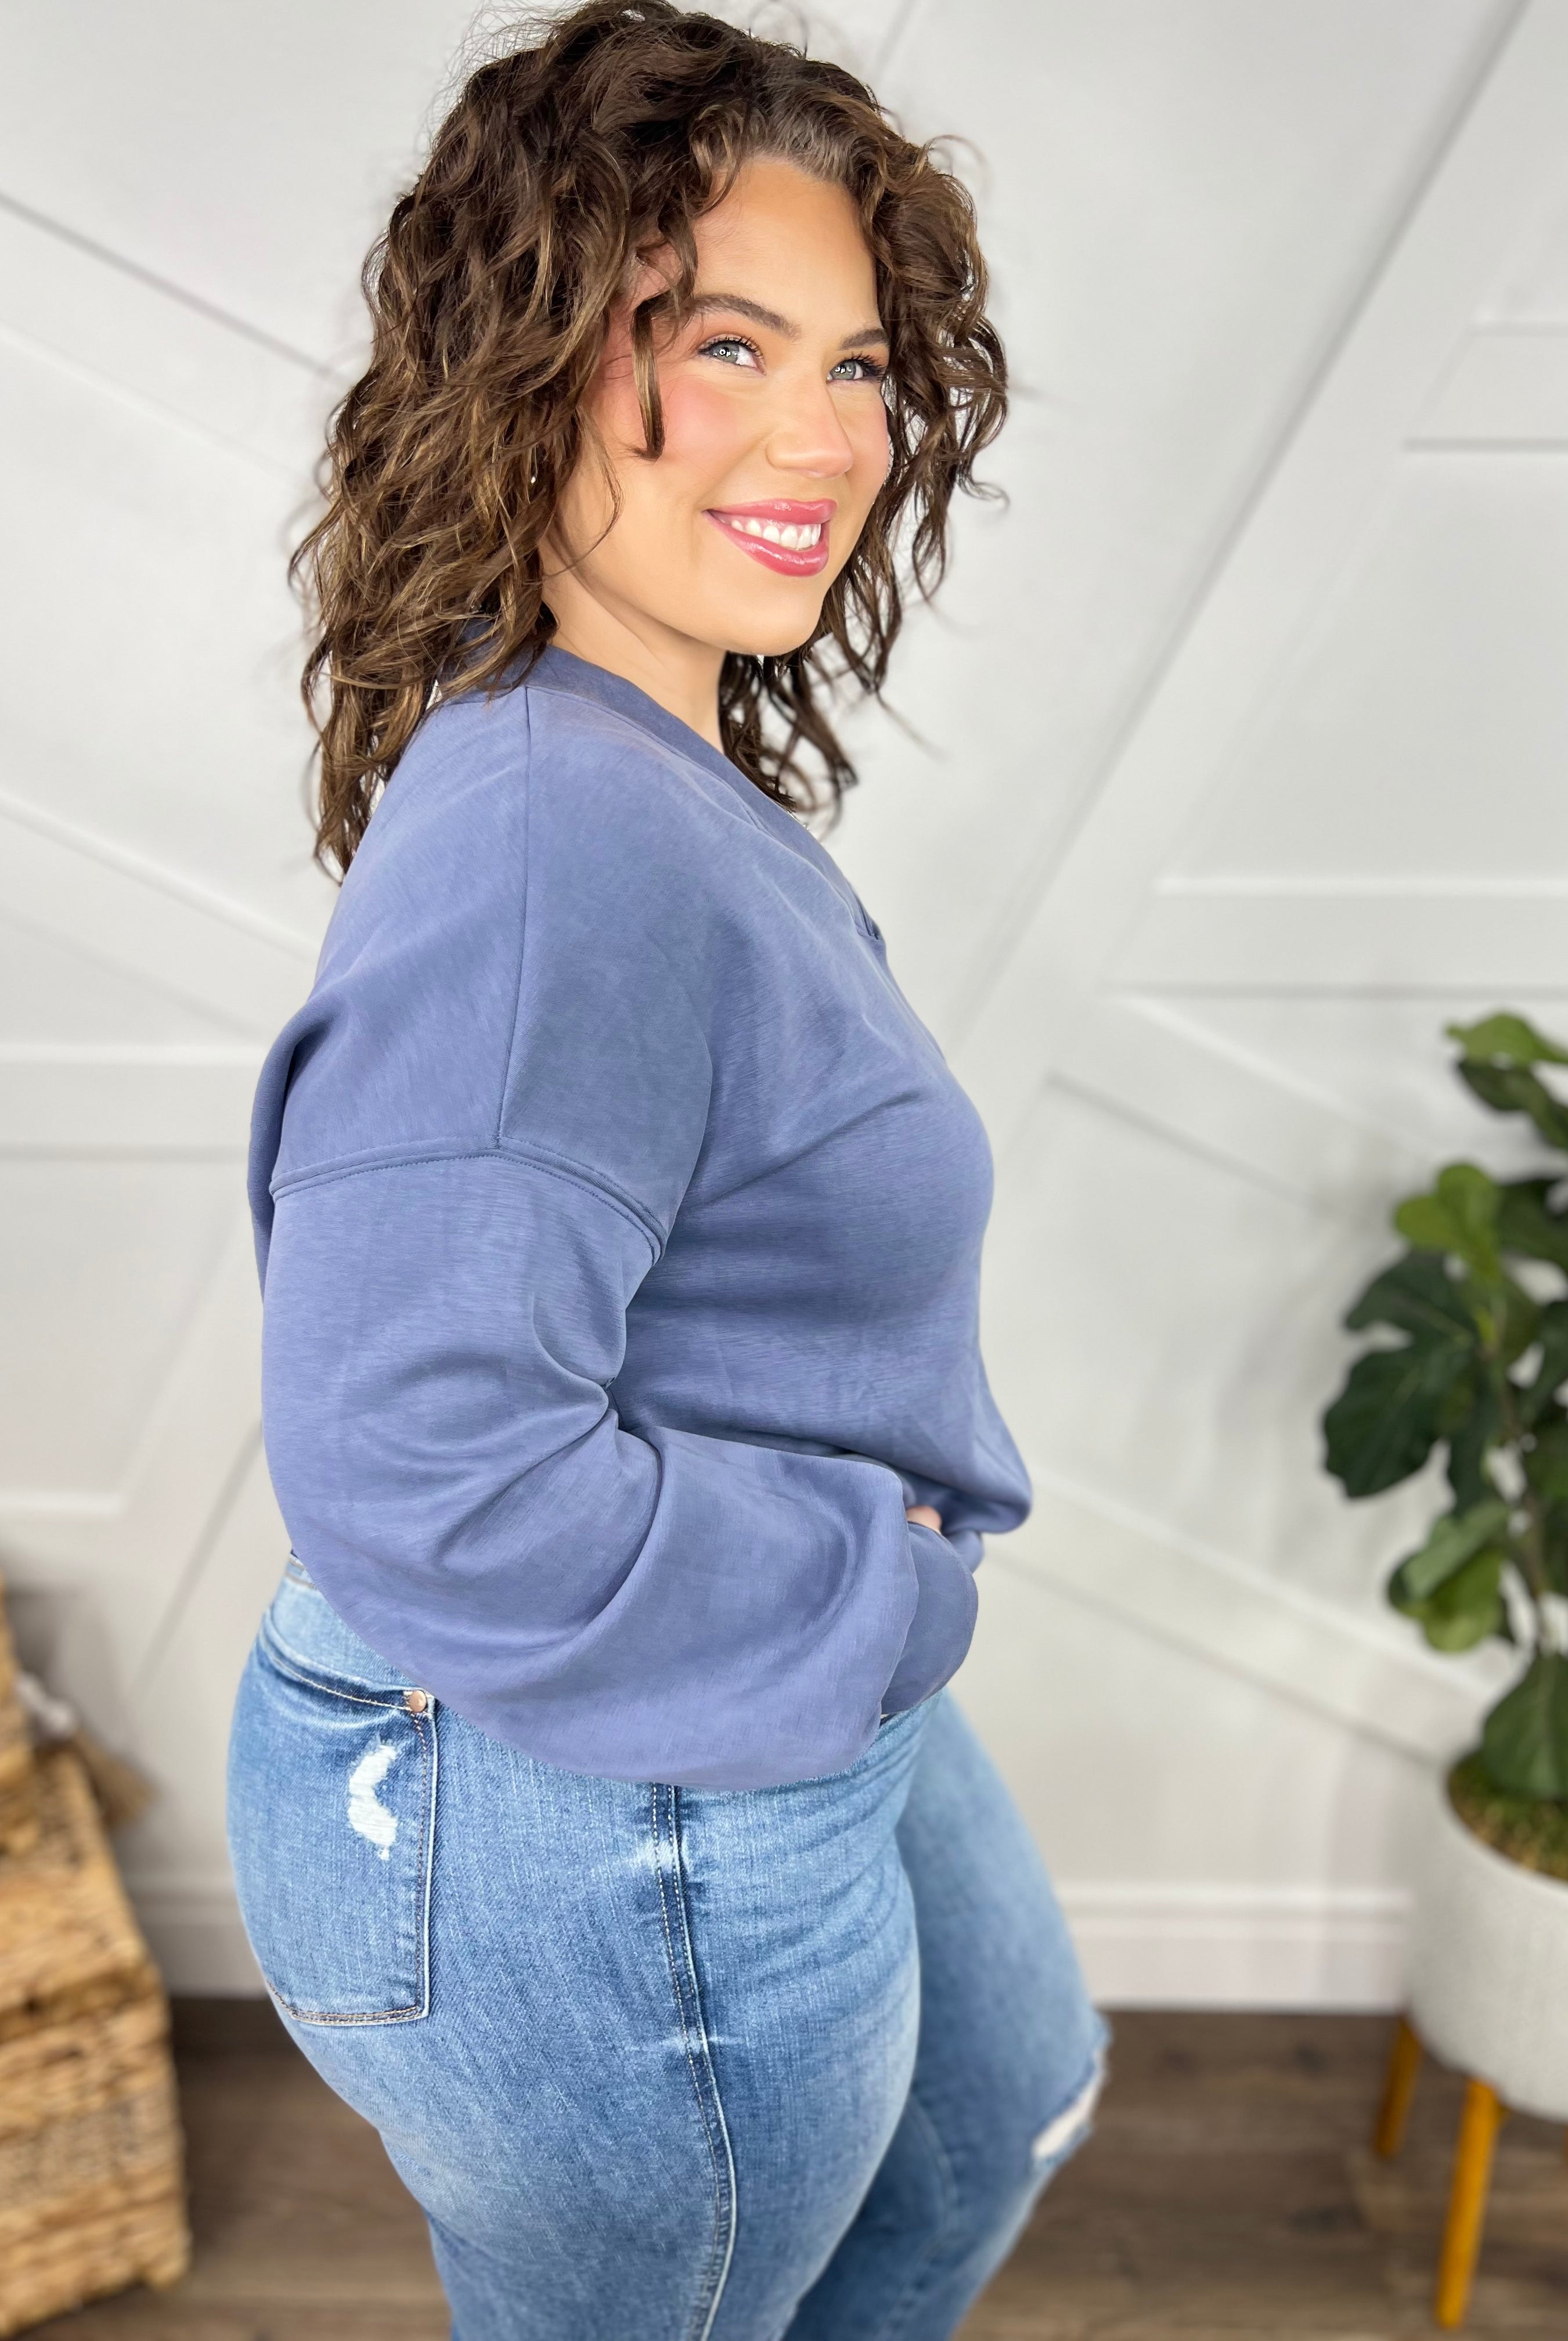 Everyday Long Sleeve Top-120 Long Sleeve Tops-White Birch-Heathered Boho Boutique, Women's Fashion and Accessories in Palmetto, FL